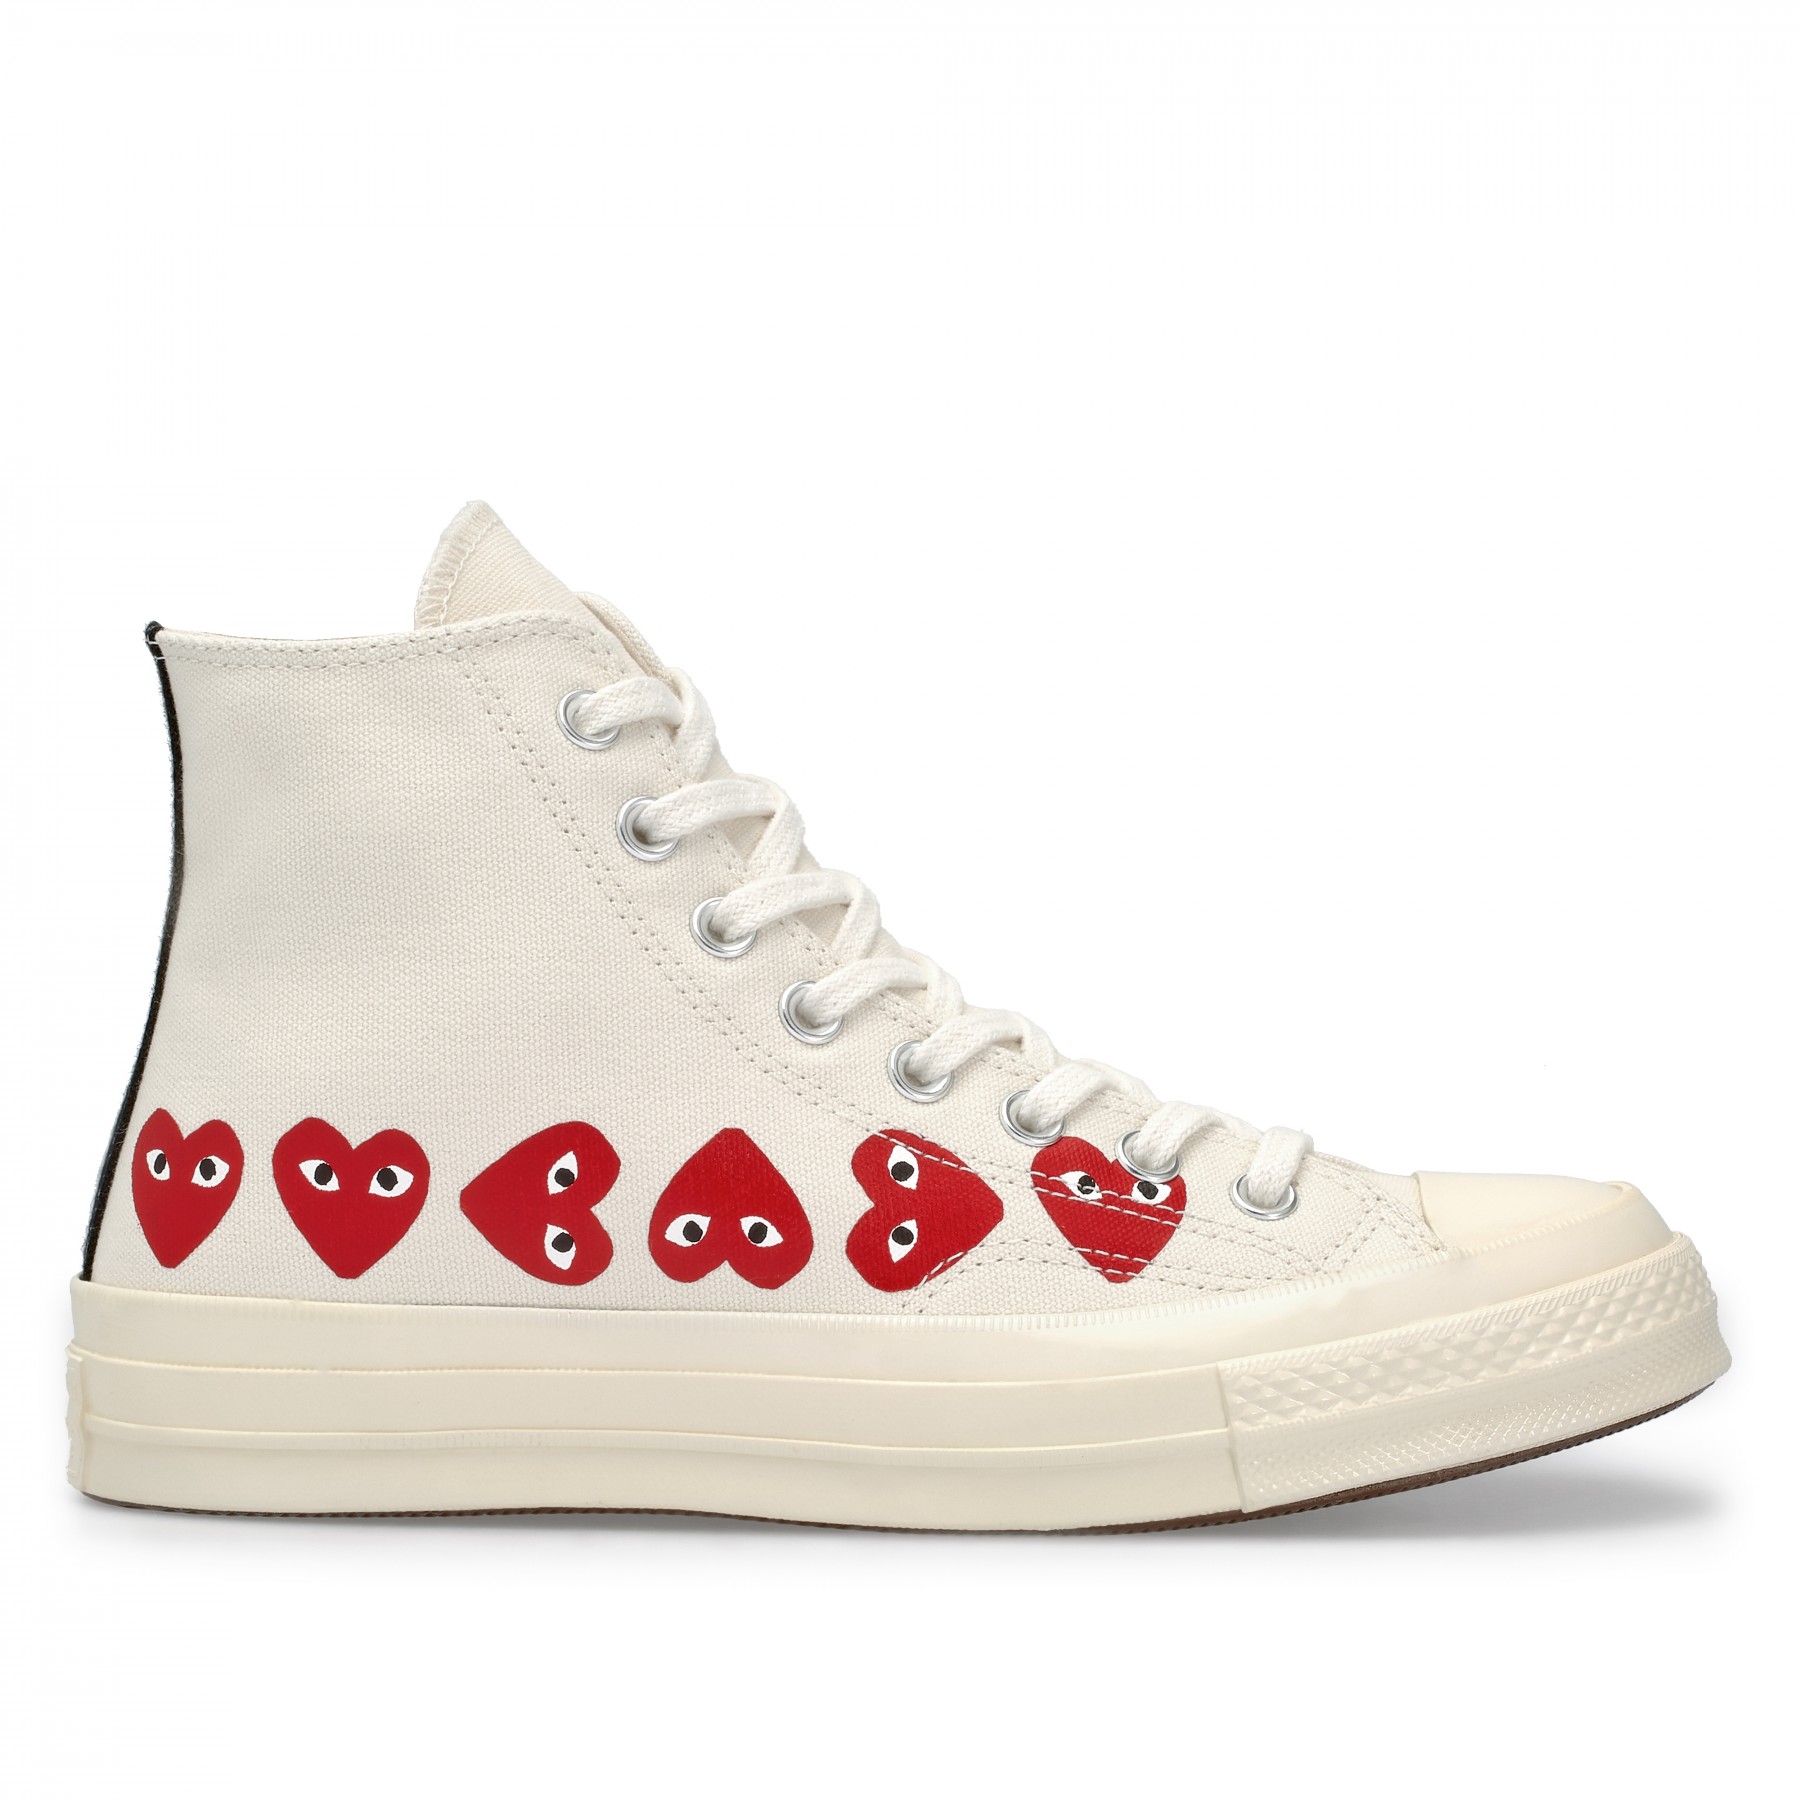 Comme Des Garcons Play X Converse Multi Red Heart Chuck Taylor All Star 70 High White Shoes